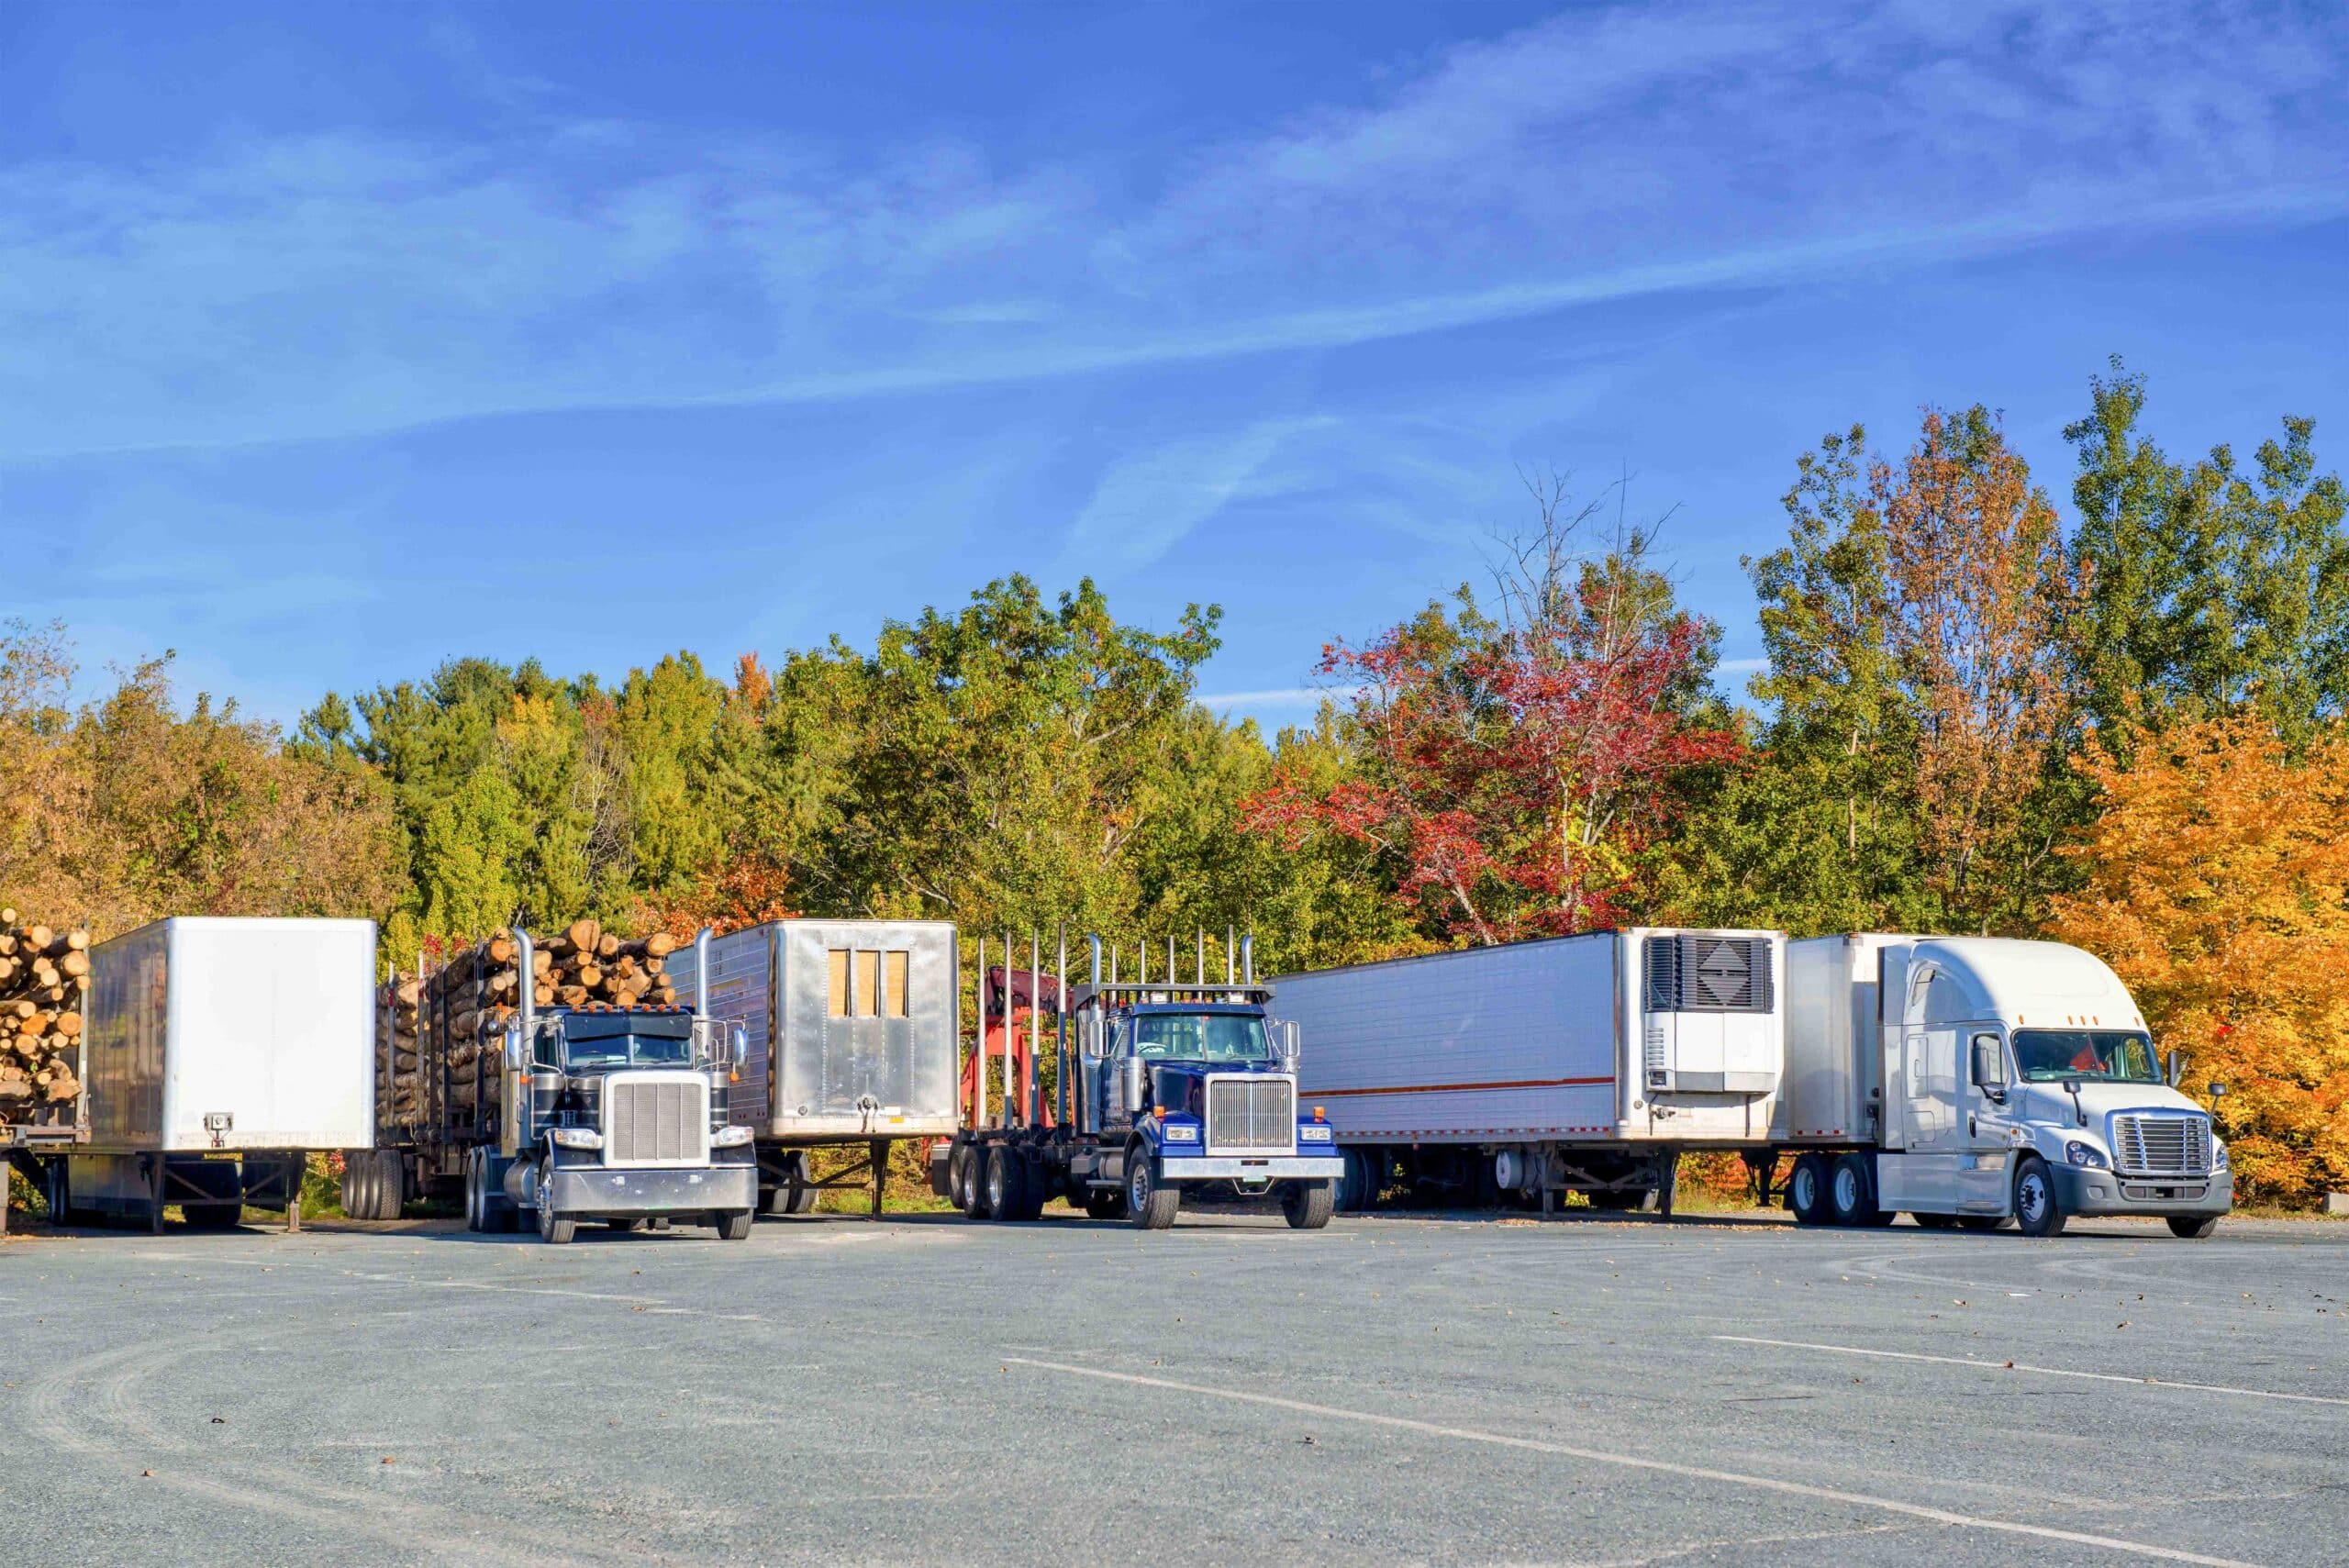 A group of trucks equipped with the latest trucking technology